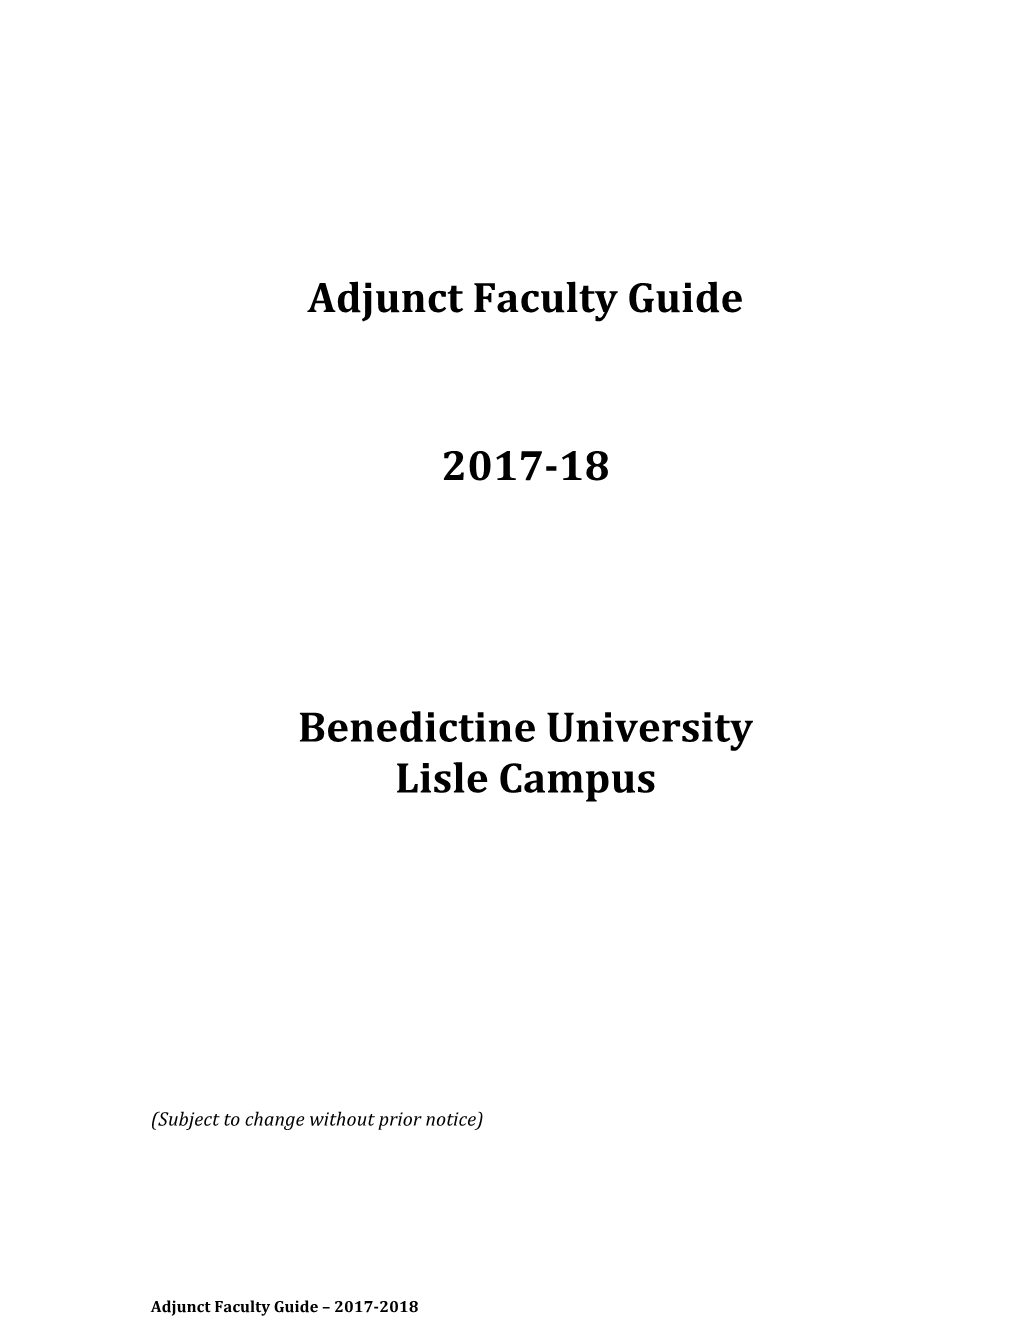 Faculty GUIDE - Business COHORTS